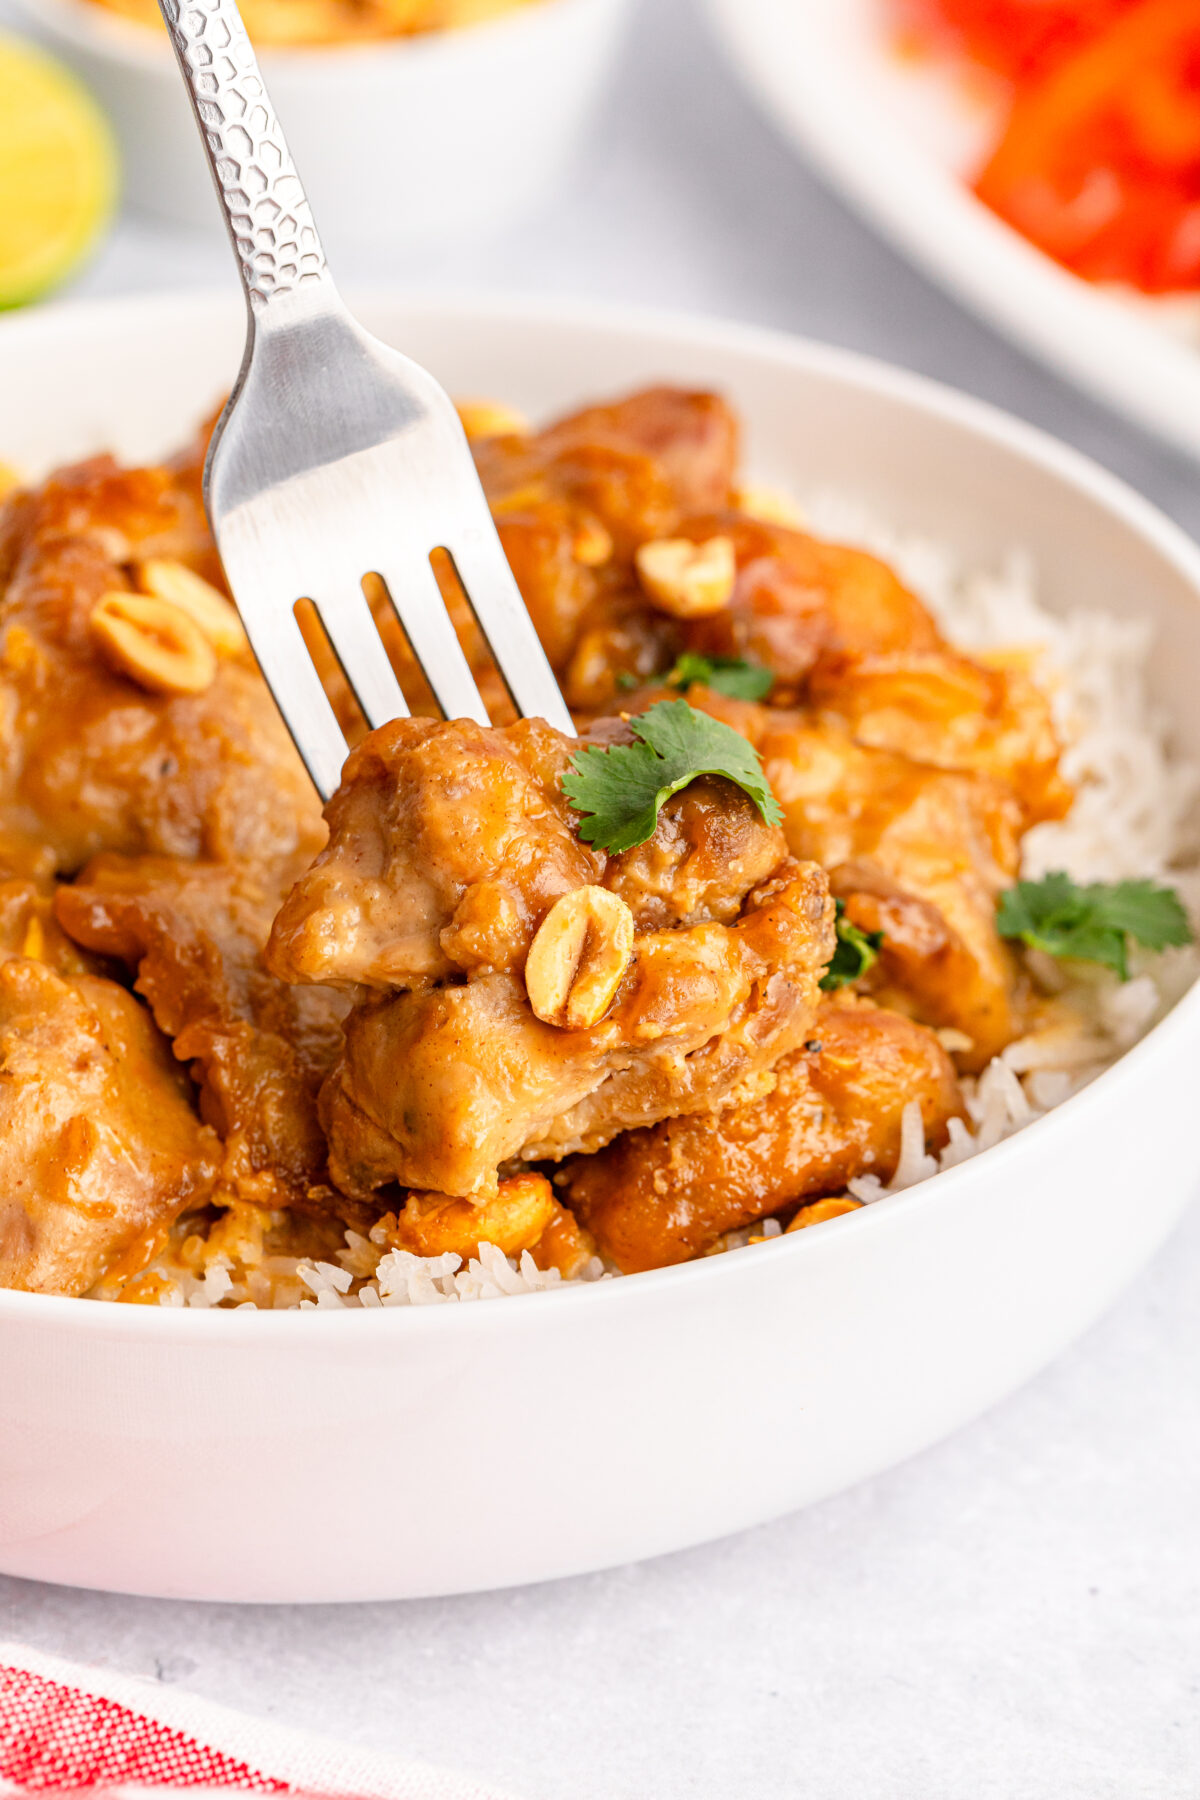 Make a quick and easy peanut butter chicken dish that packs big flavour! This delicious recipe is a simple twist on classic Asian flavours.